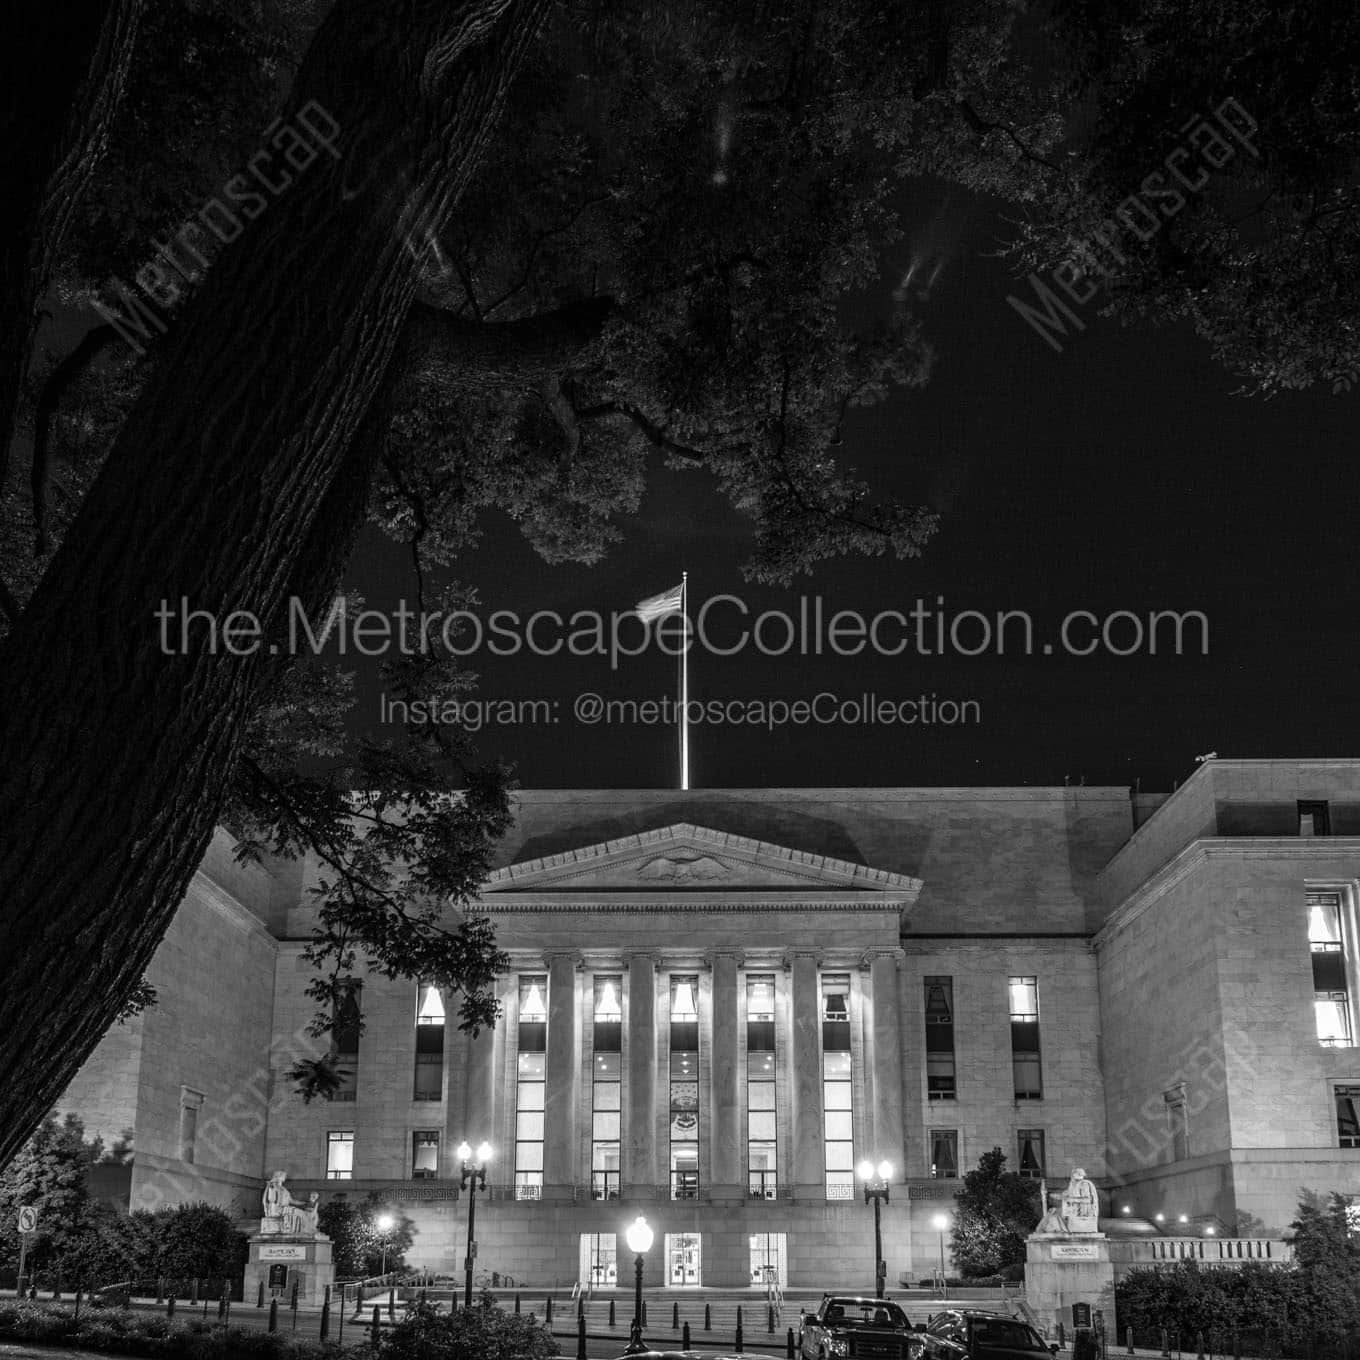 rayburn office building at night Black & White Wall Art